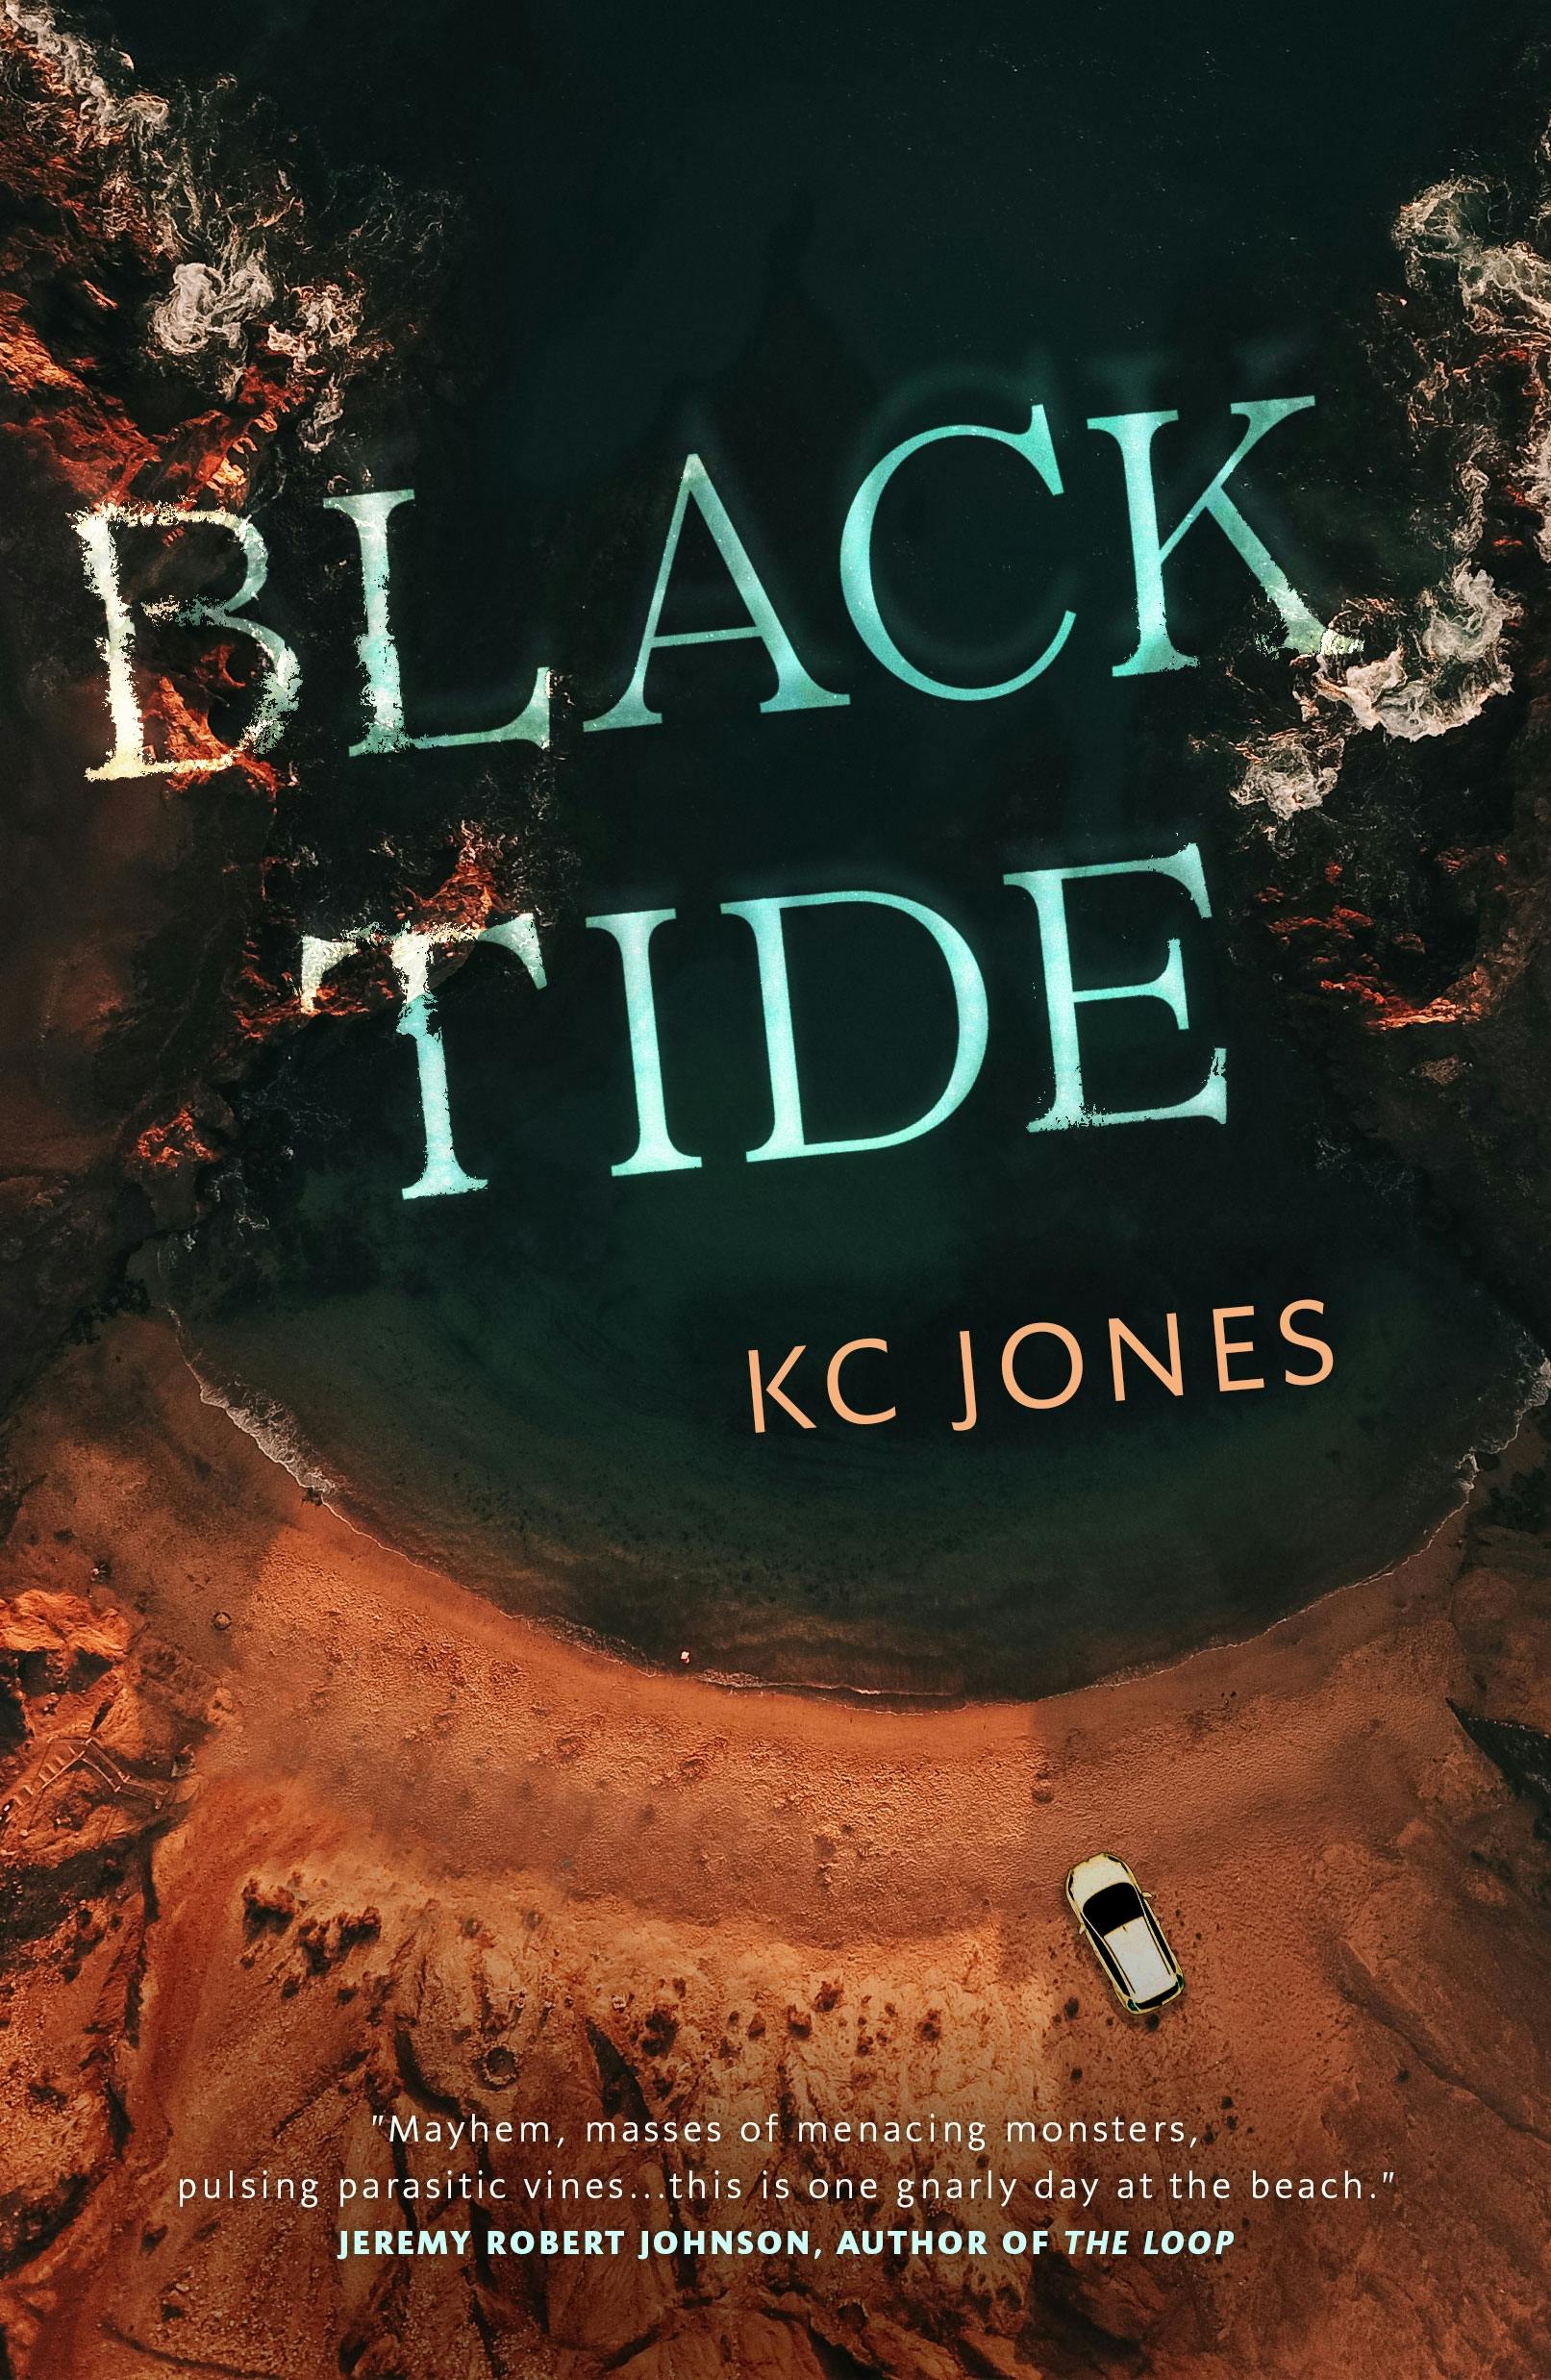 Cover for the book titled as: Black Tide